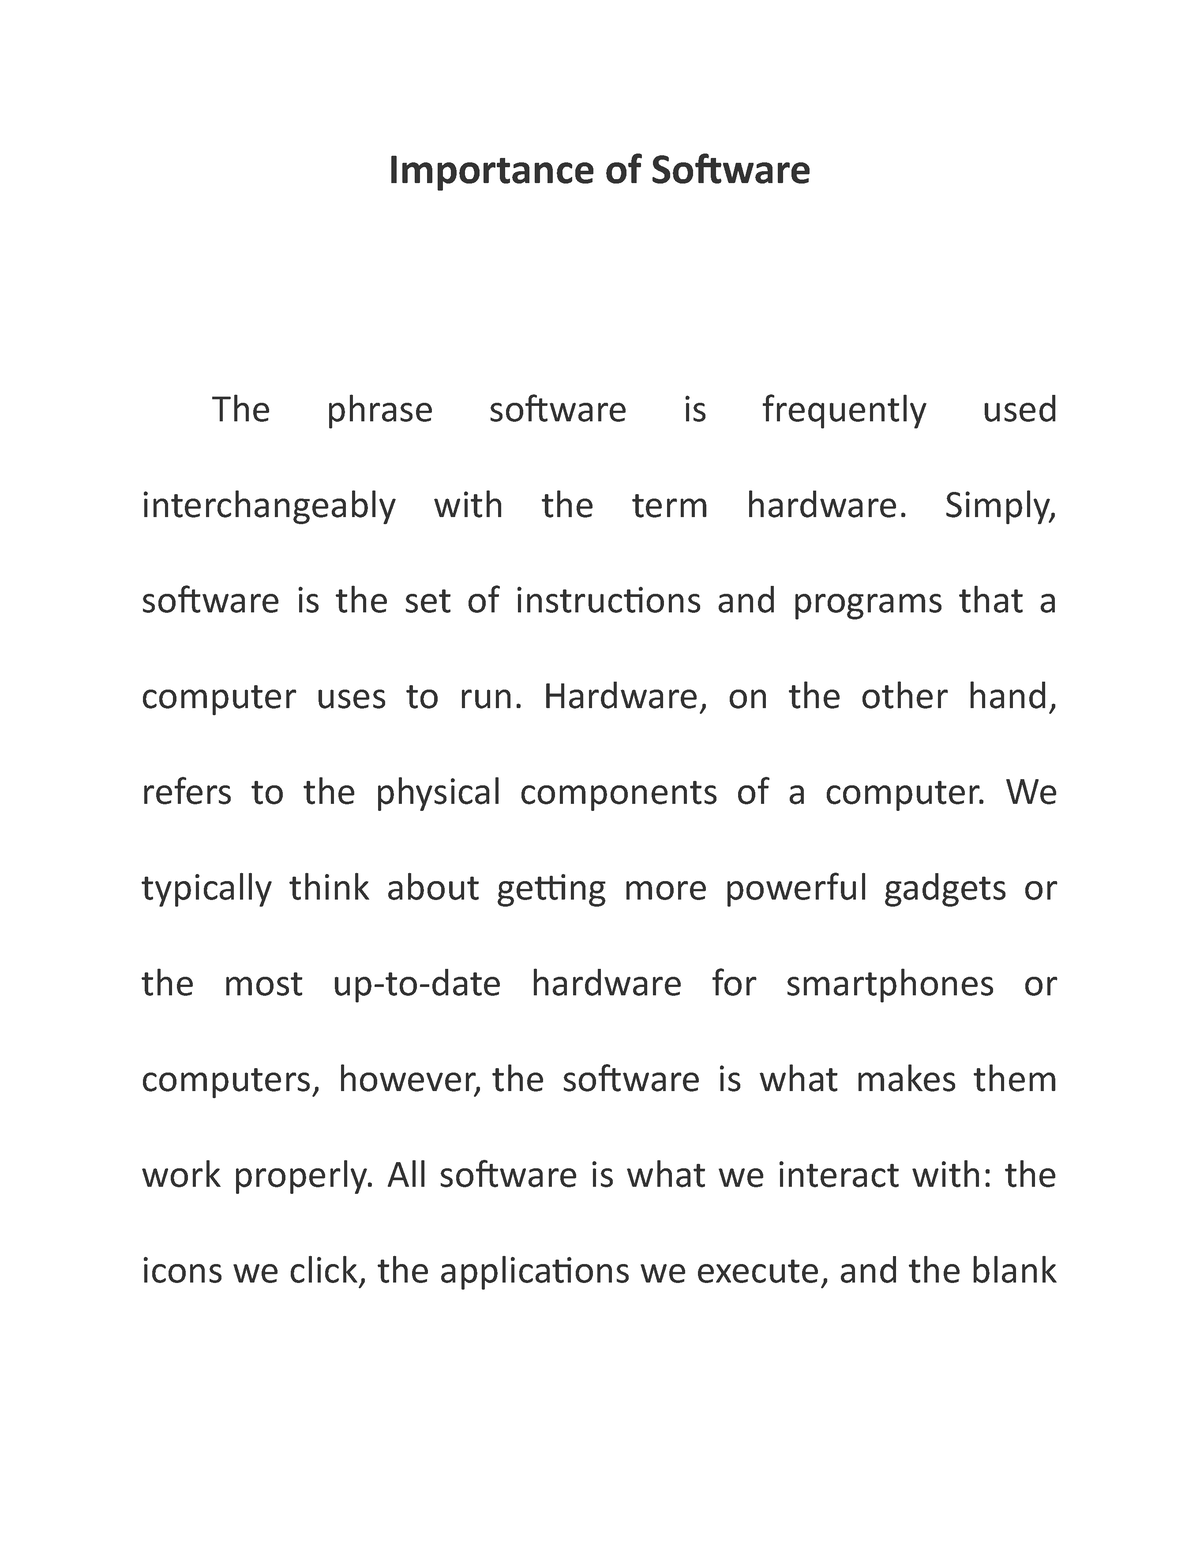 importance of application software essay